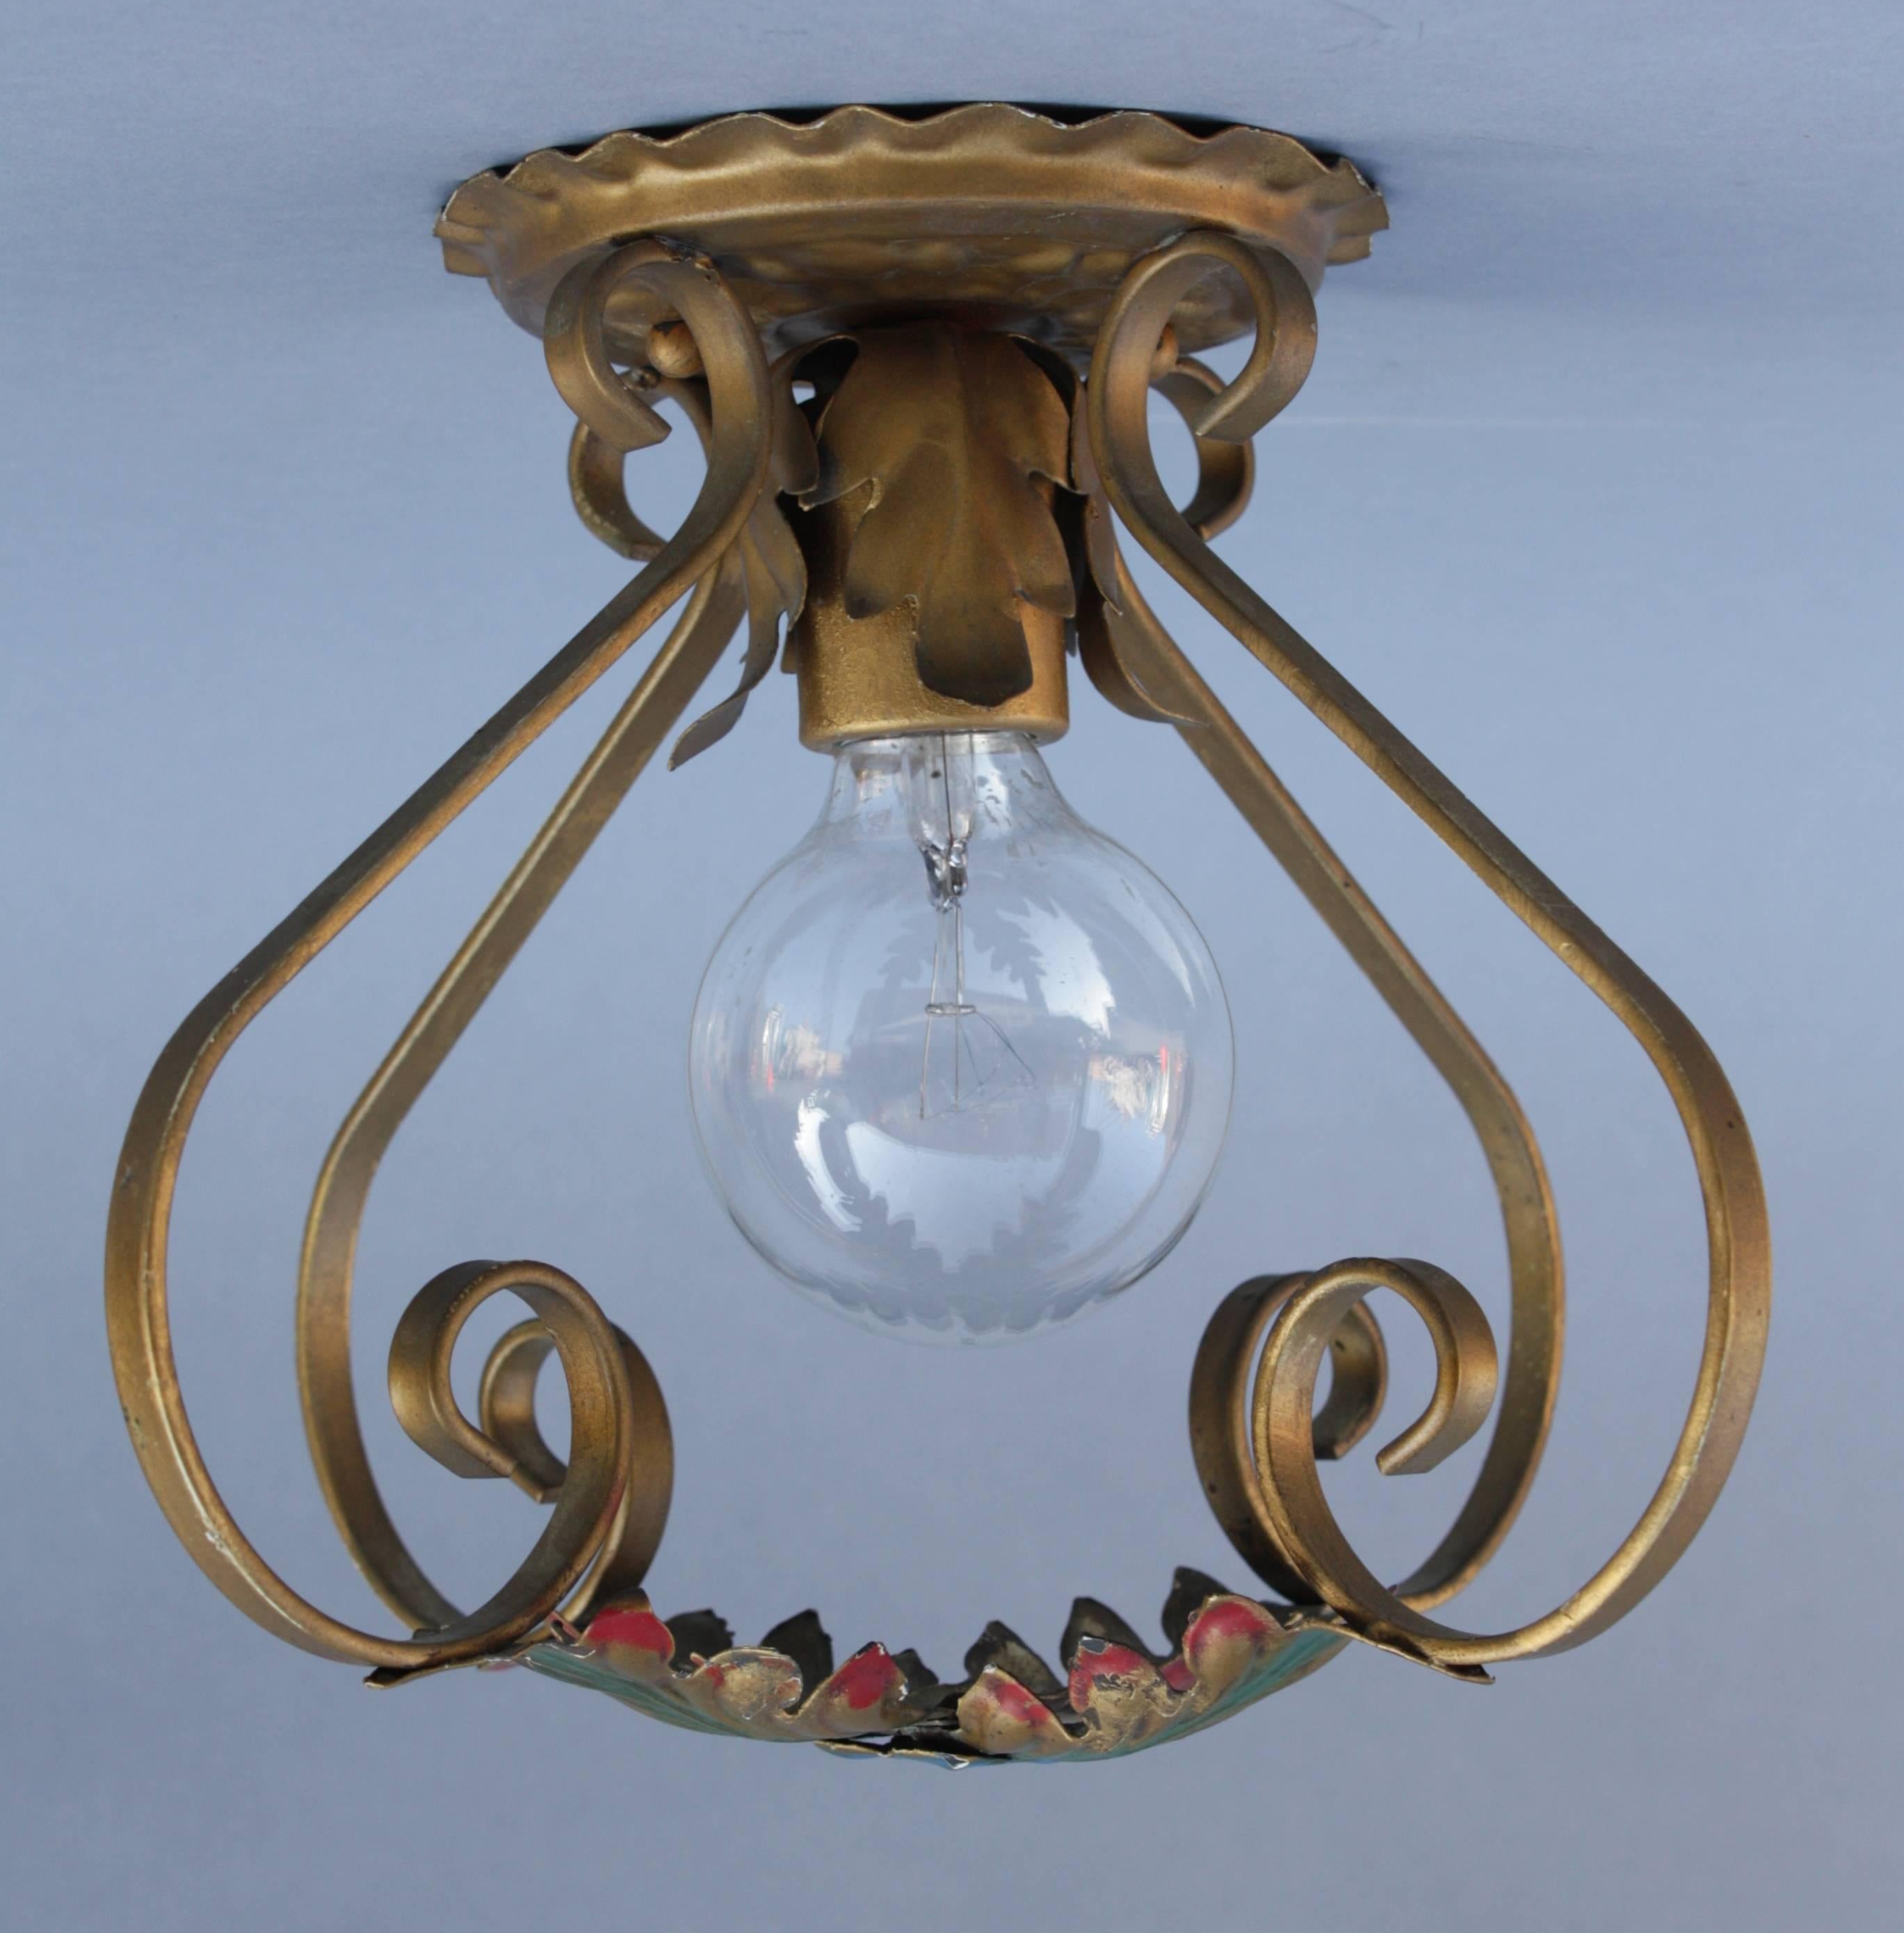 North American 1920s Ceiling Flush Light with Original Polychrome Finish